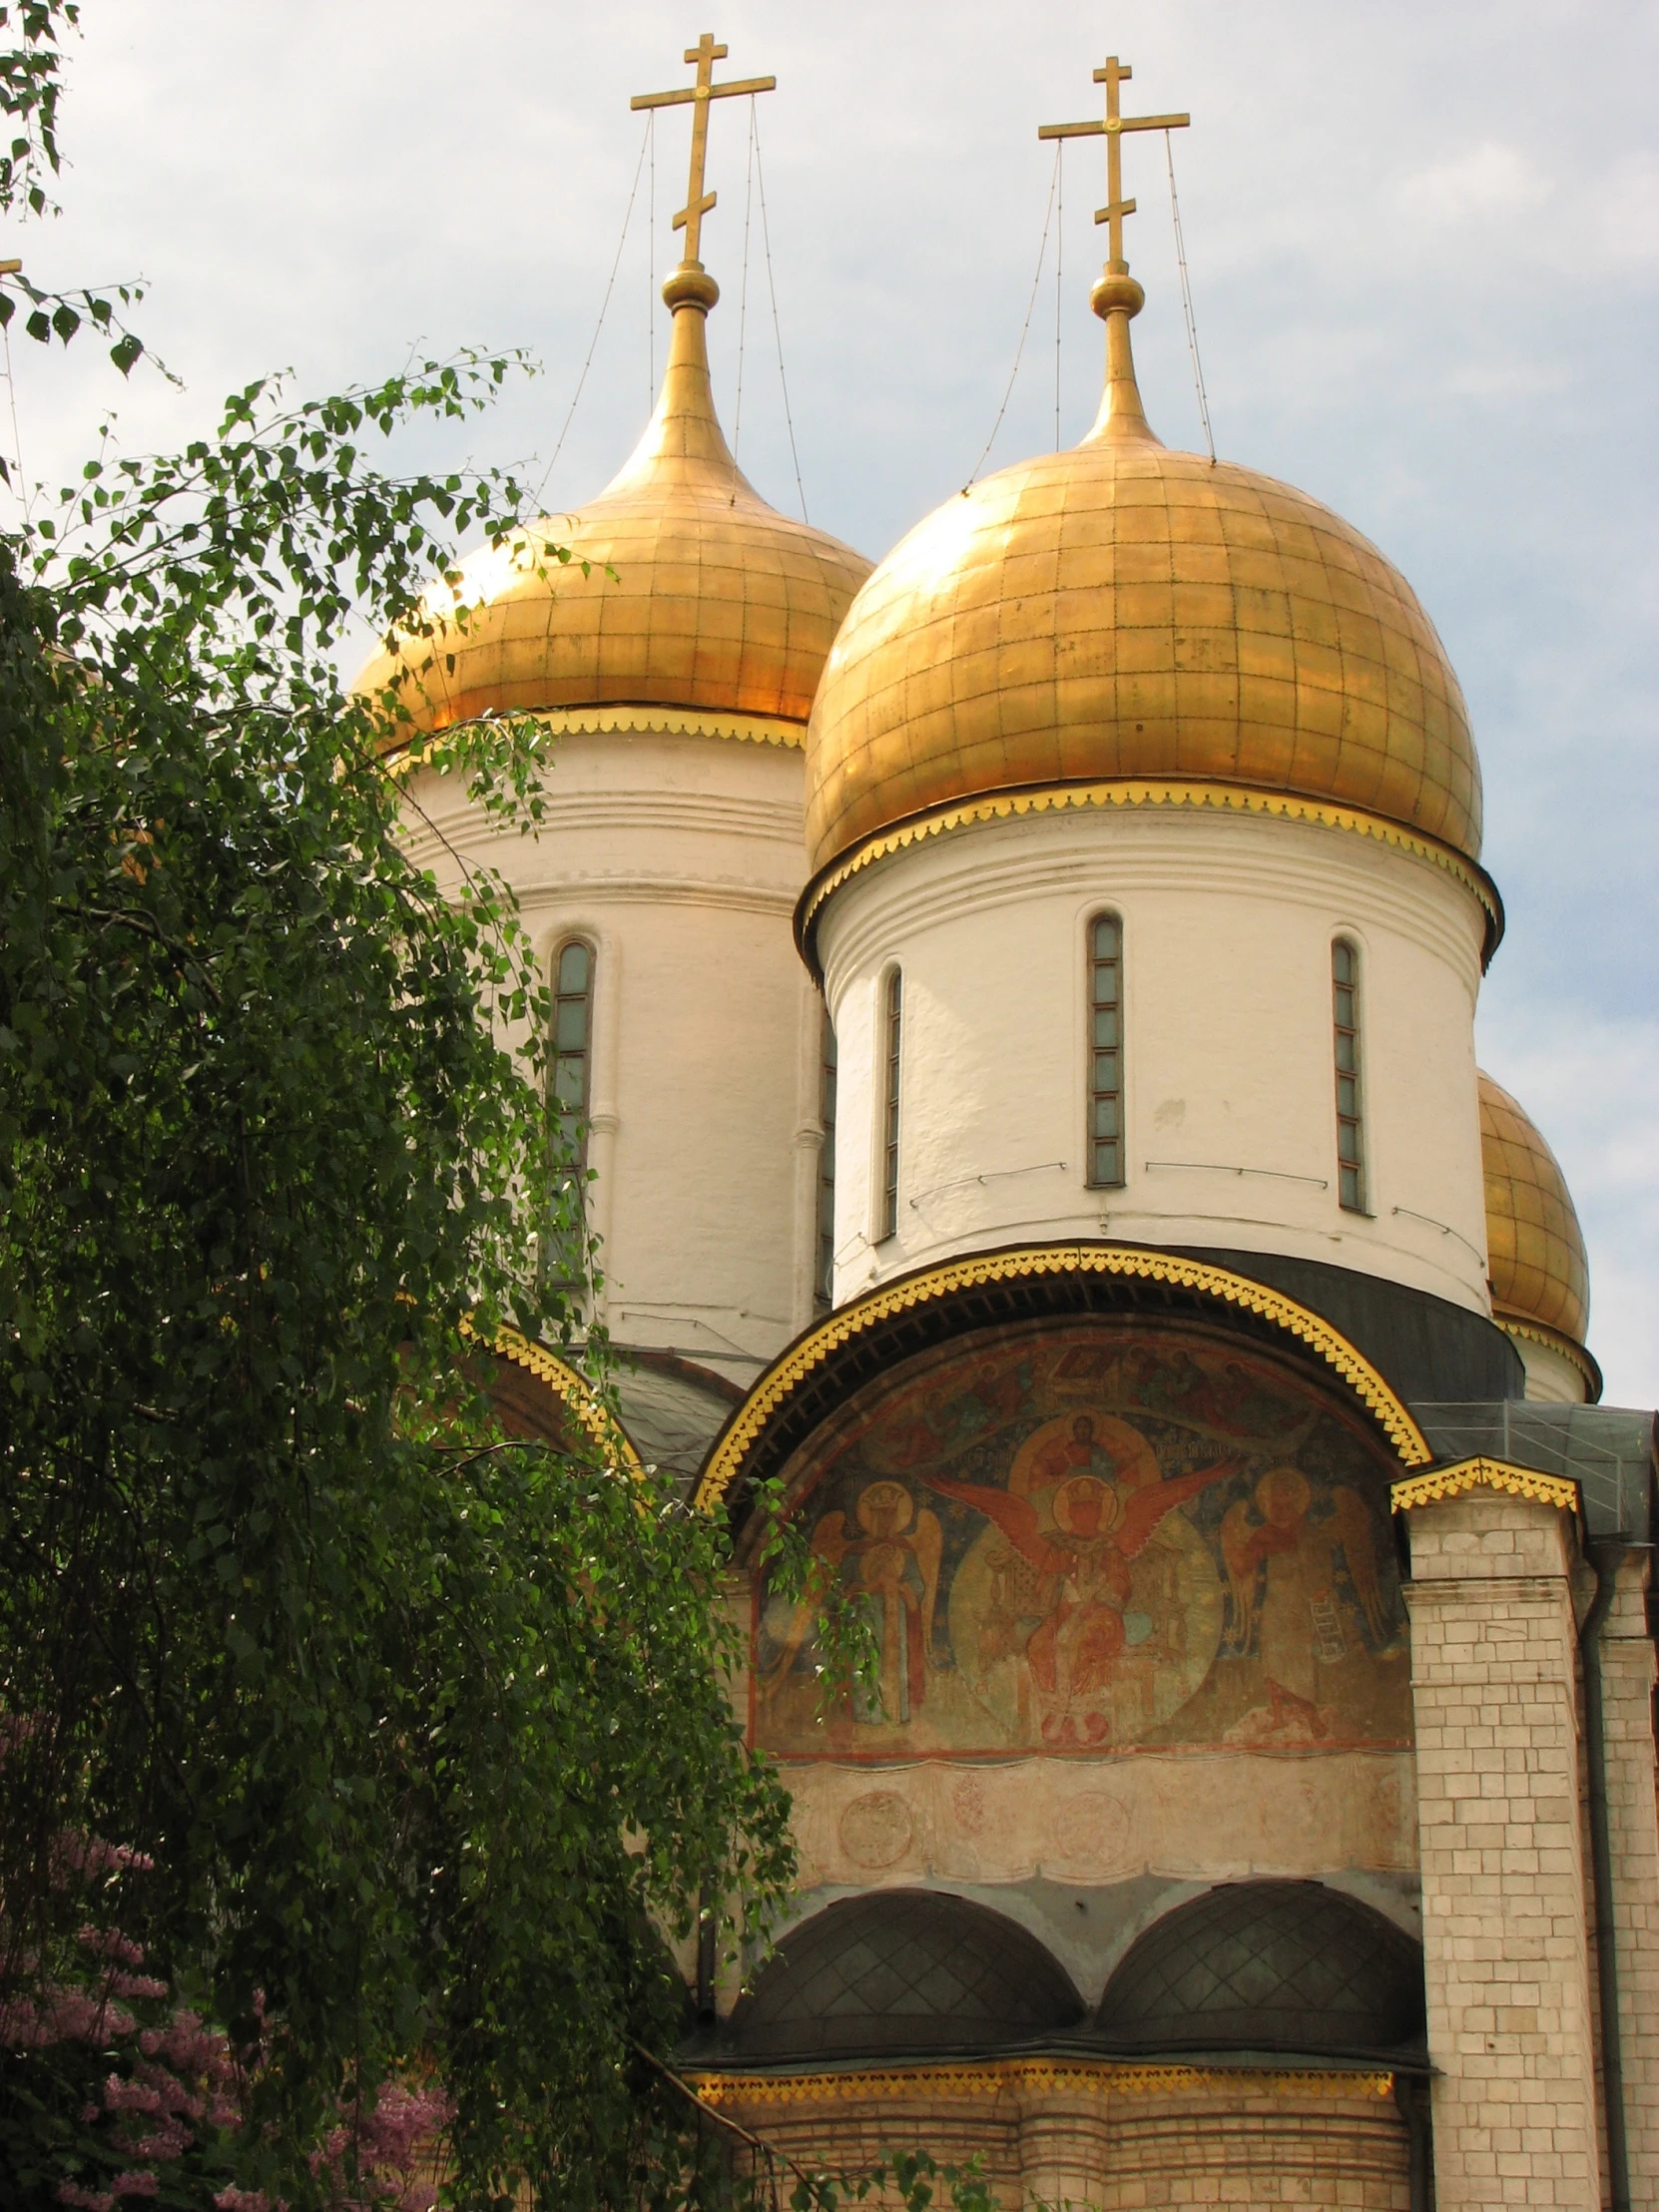 a church with a golden dome and crosses on the top of it